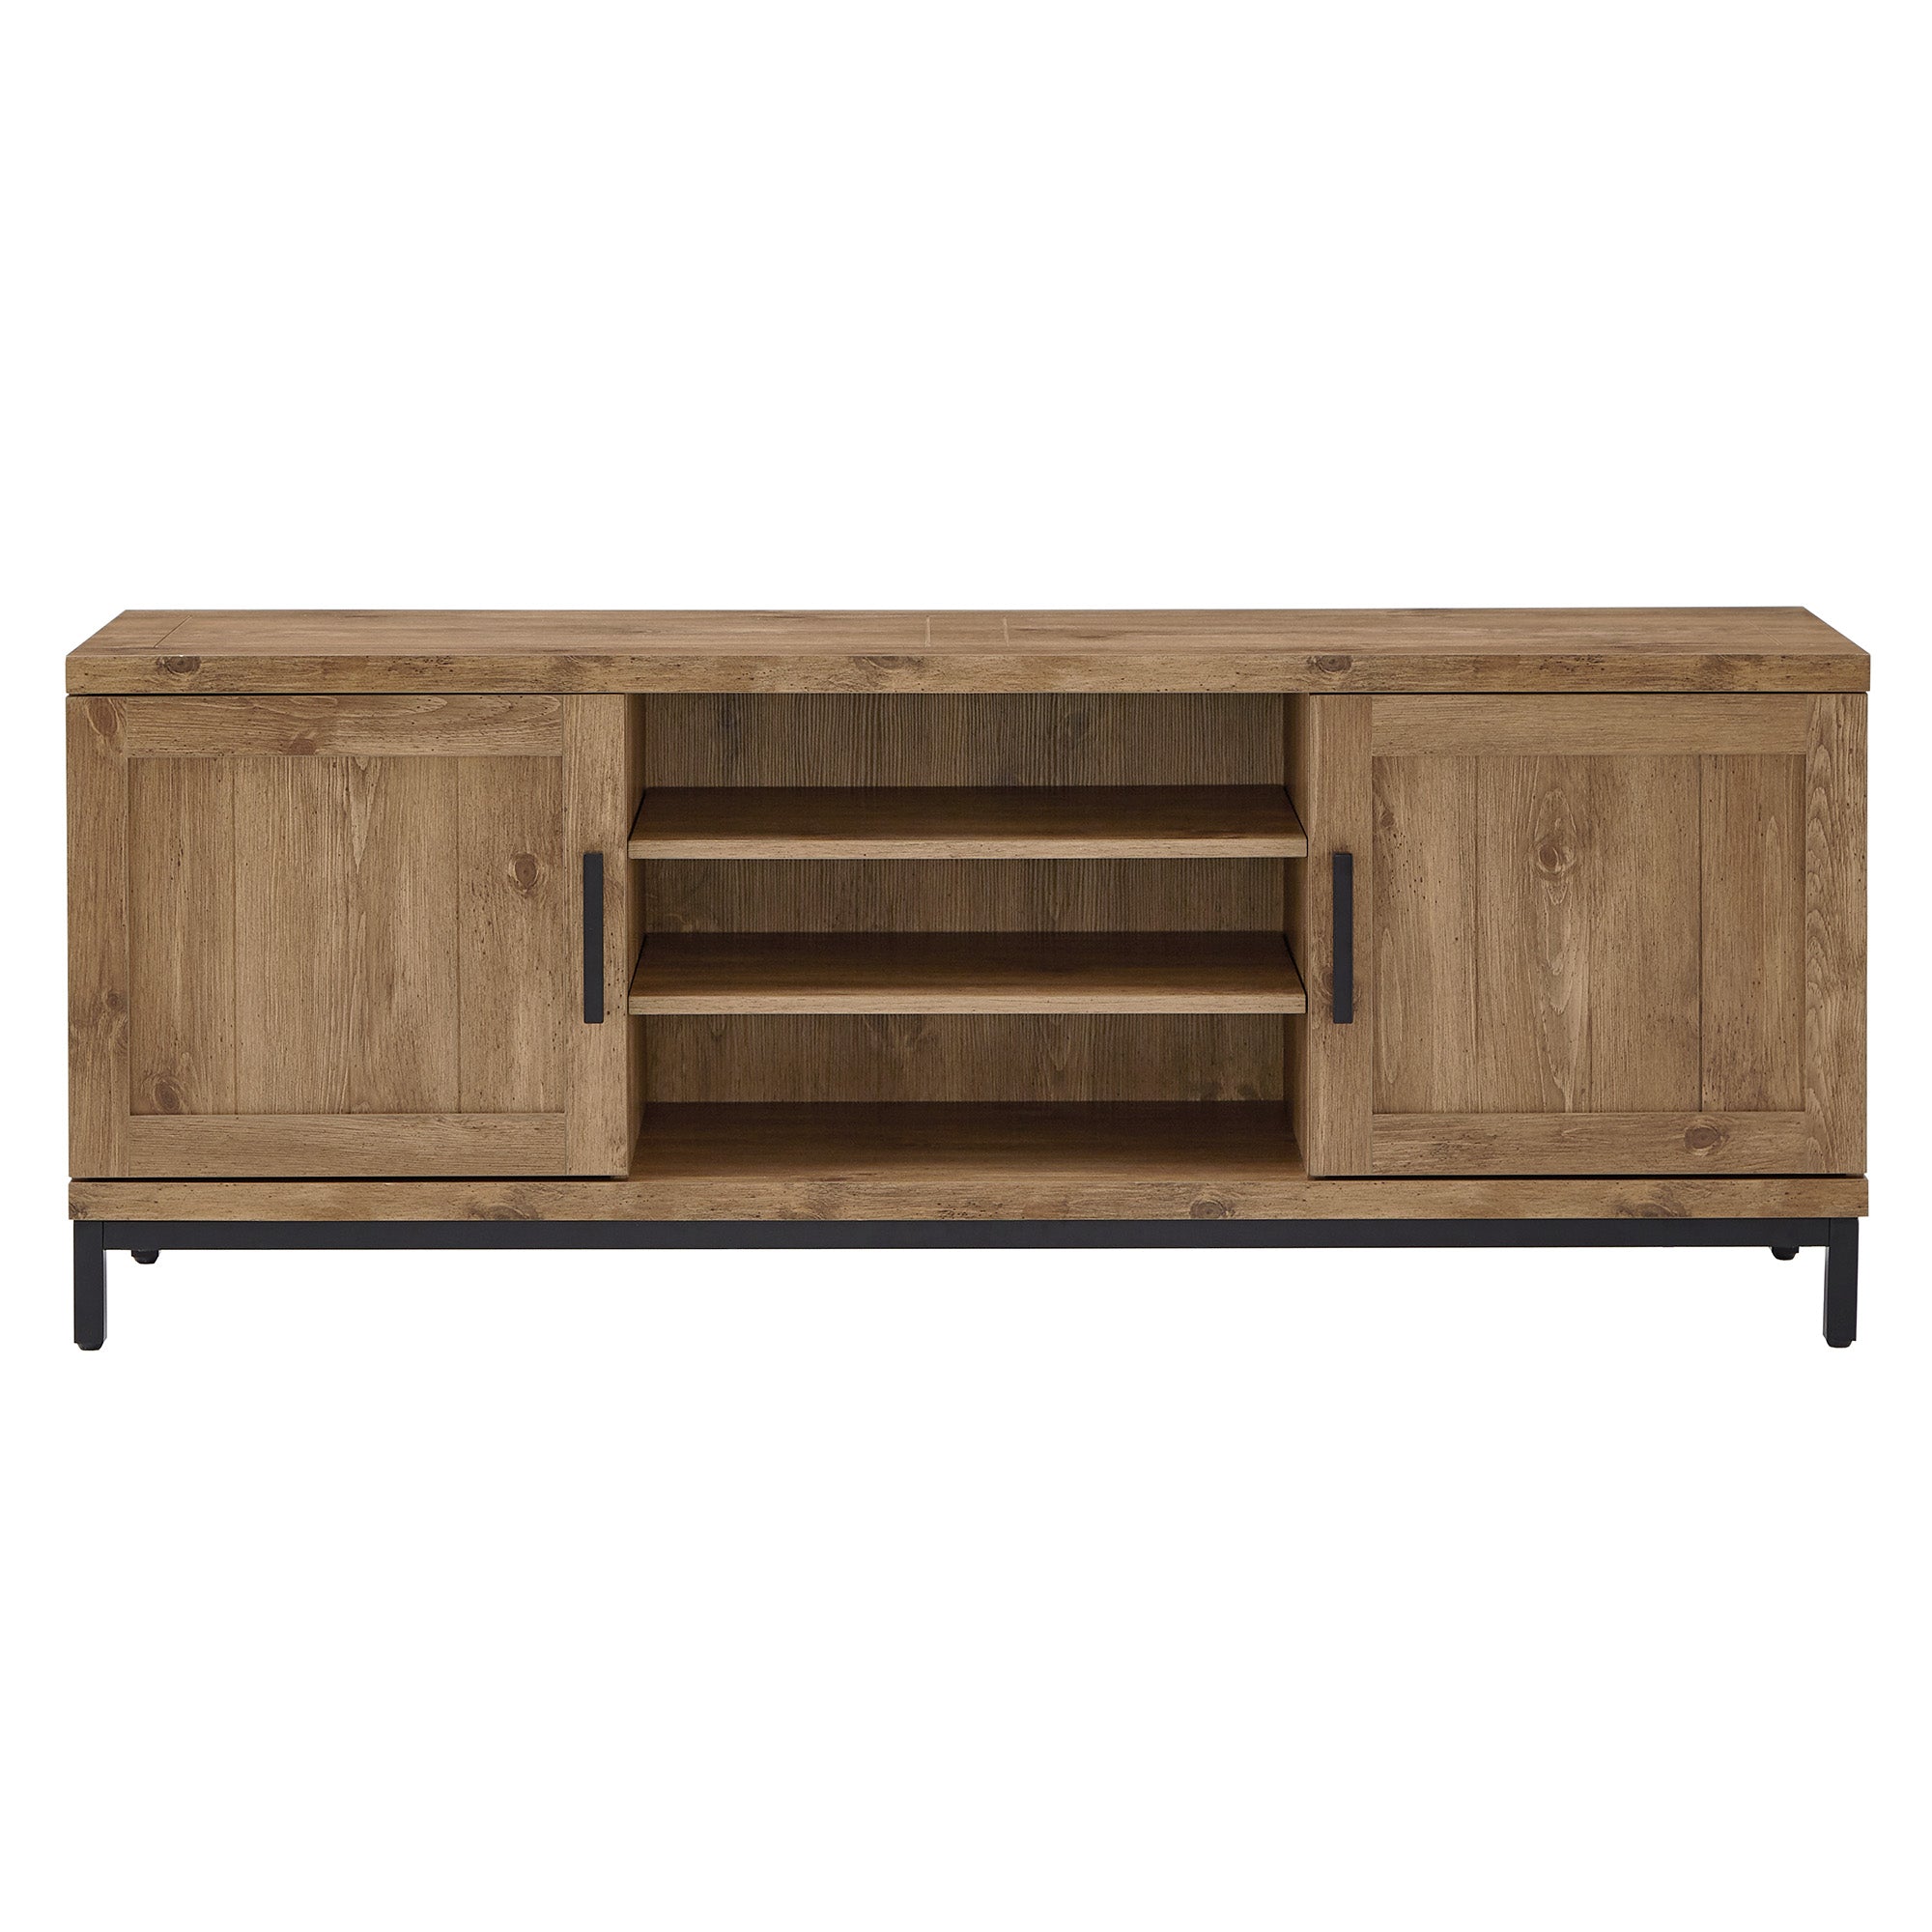 TV Stand for TVs up to 65" - Oak Finish